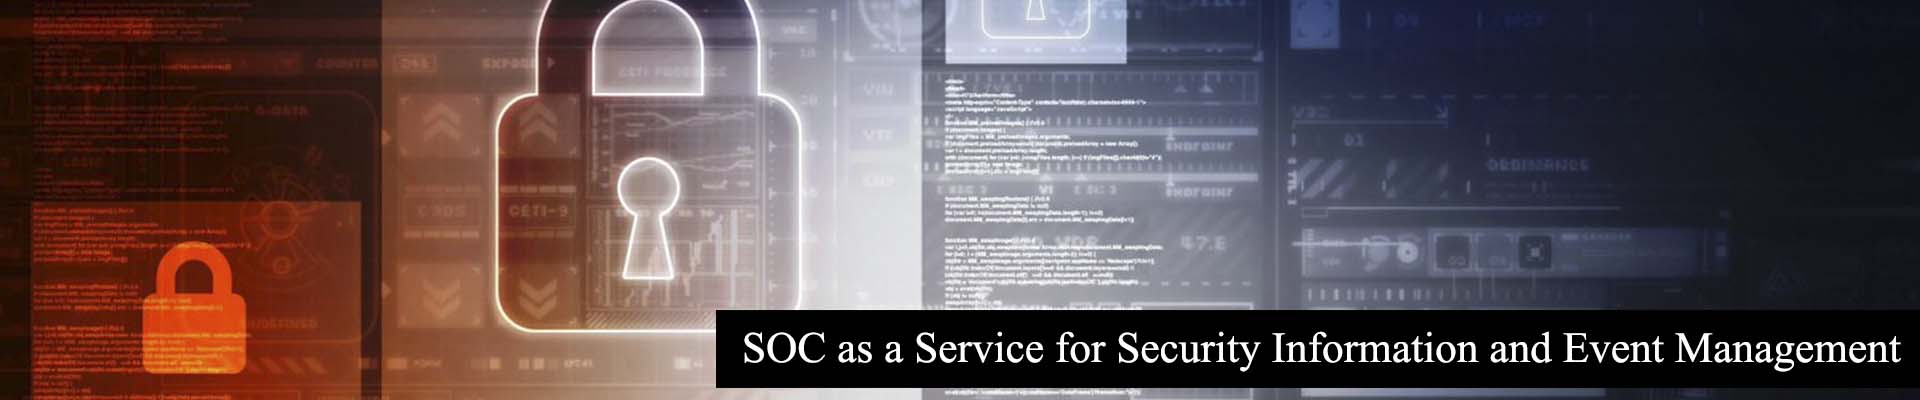 SOC as a Service for Security Information and Event Management